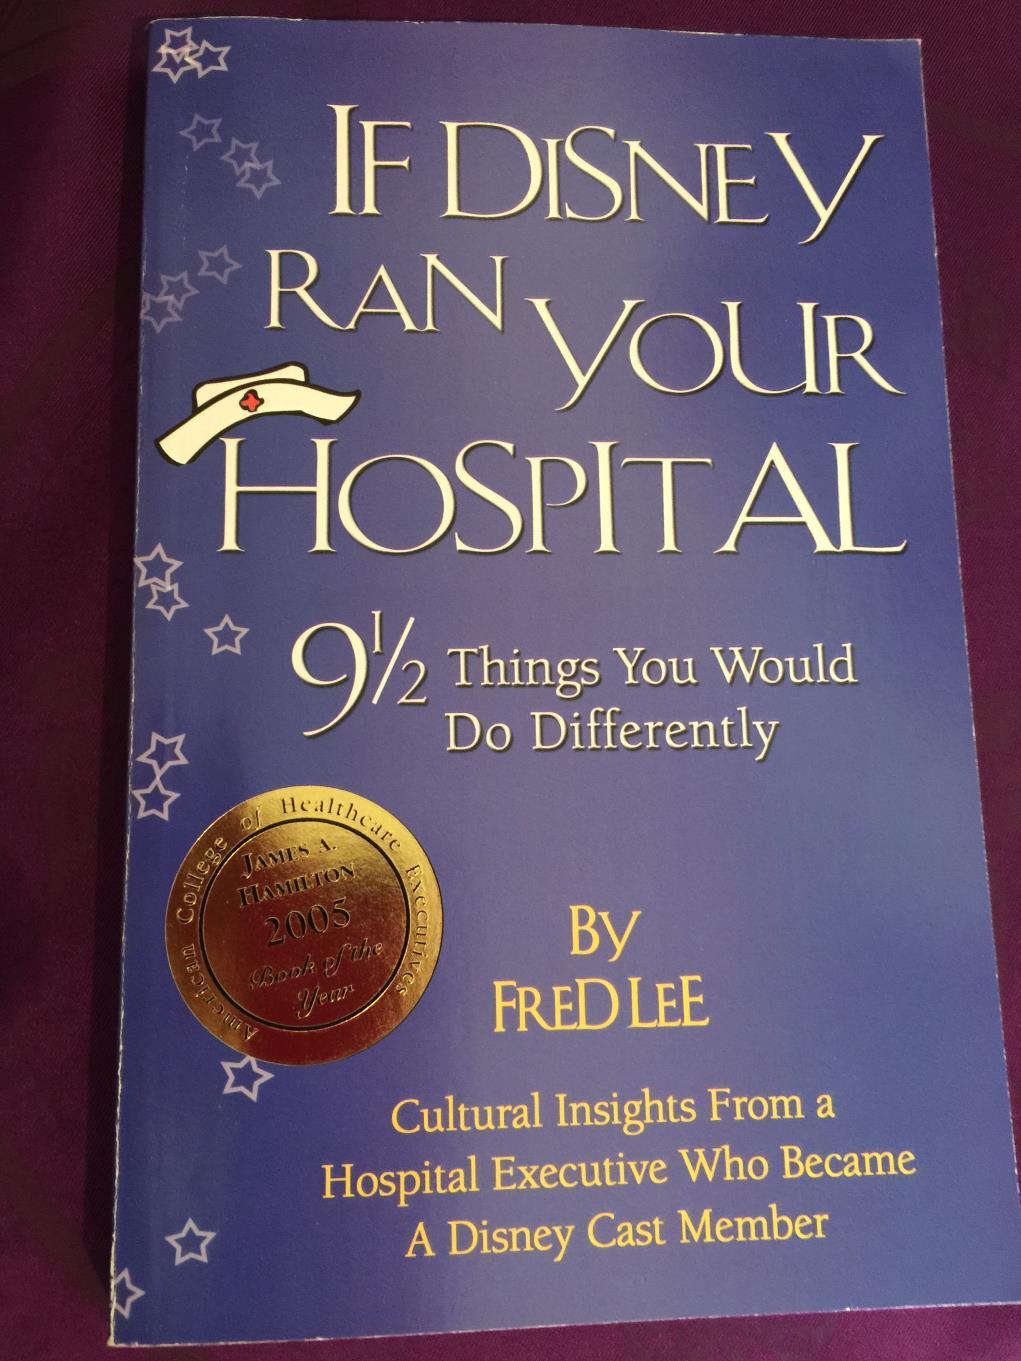 If Disney Ran Your Hospital: 9 1/2 Things You